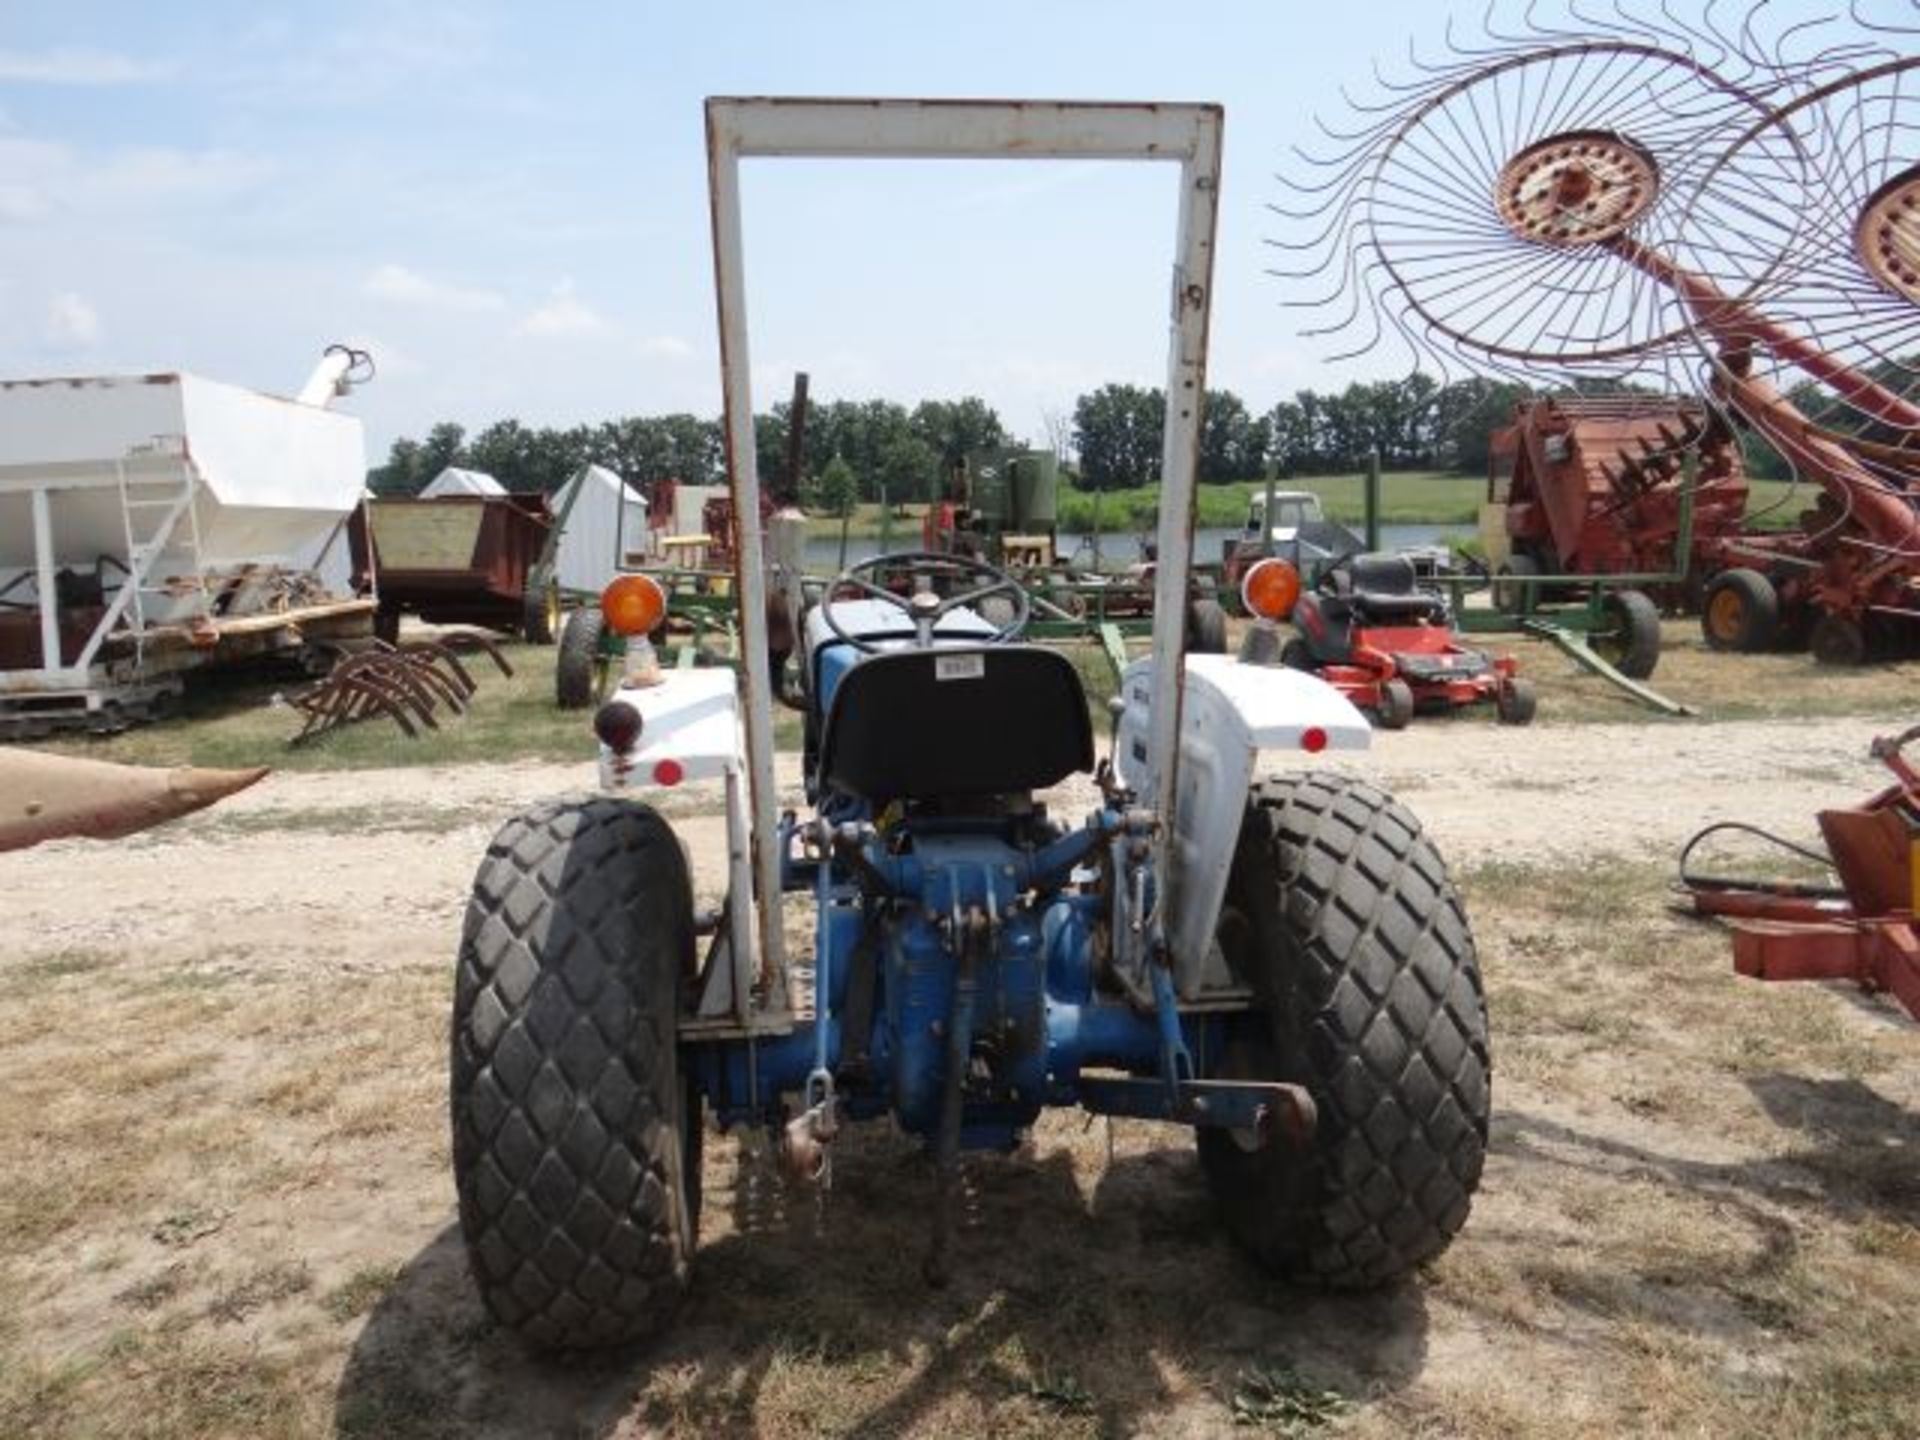 Ford 1600 Tractor, 1977 #112857, 4057 hrs, 2wd, 23hp Diesel, 9F/3R Trans, Diff Lock, 540 PTO - Image 3 of 3